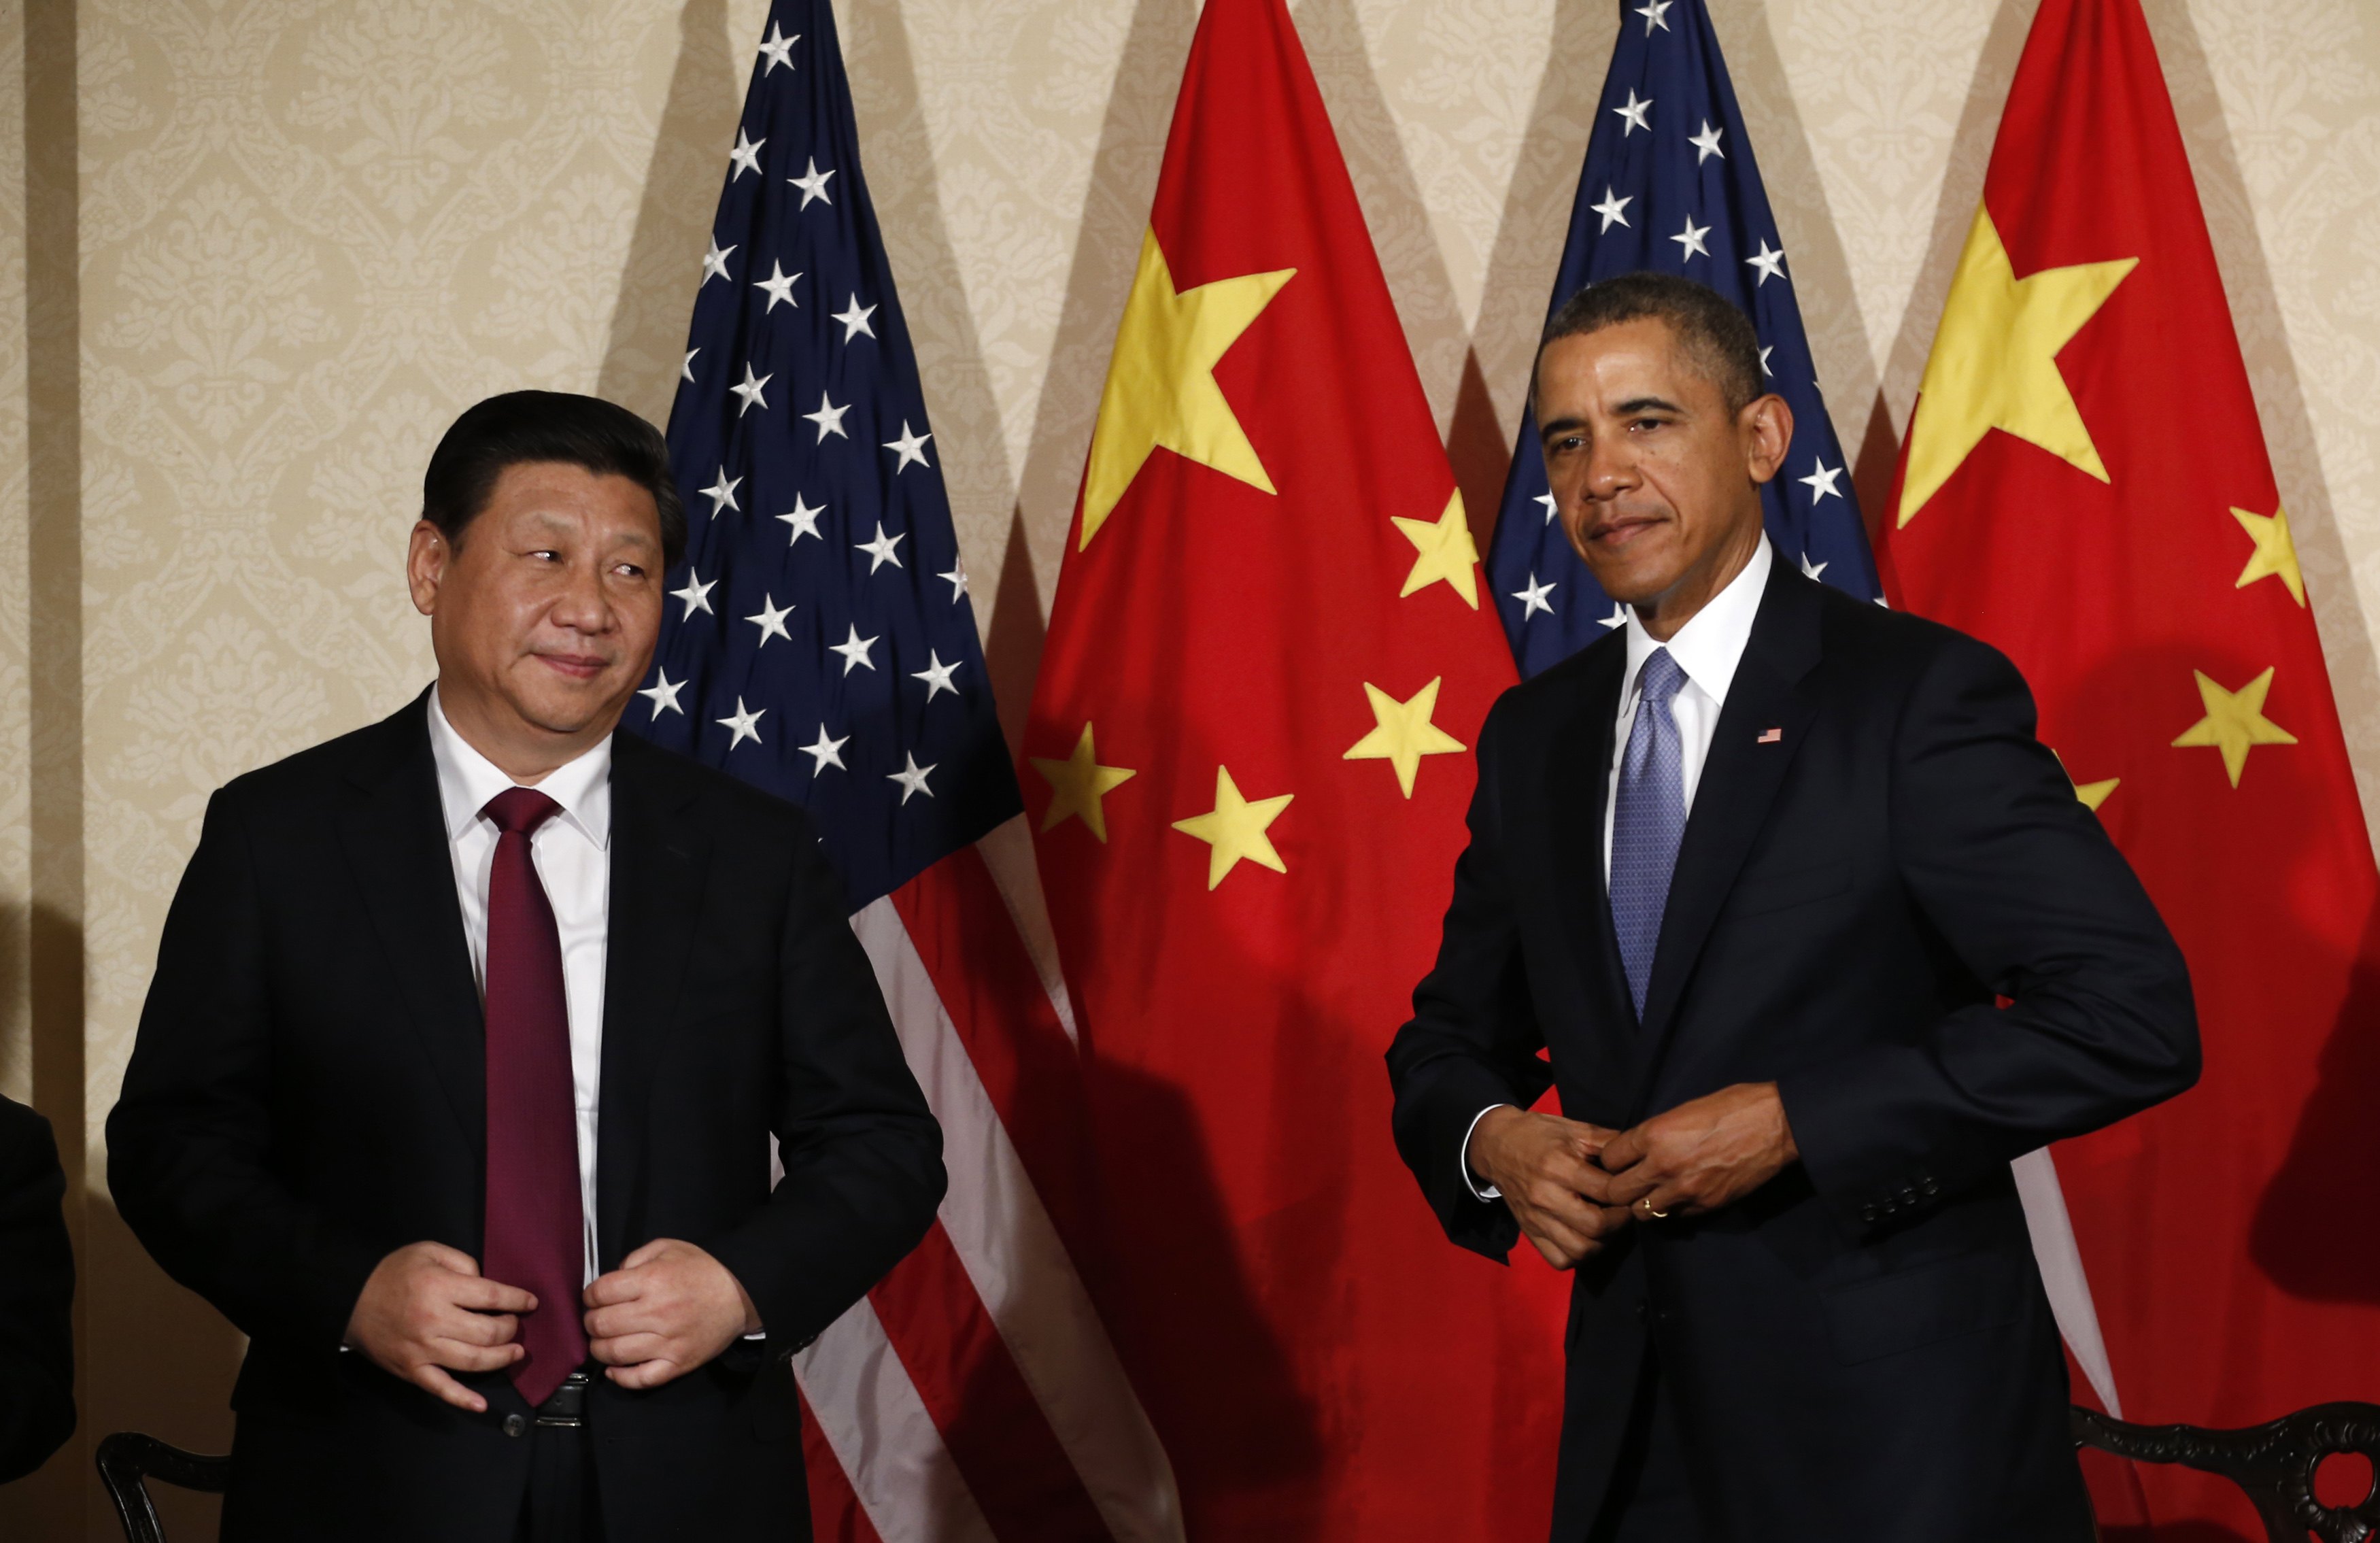 The G2 concept has been rejected by both China and the US, but close consultation between the world's two biggest economies is crucial. Photo: Reuters